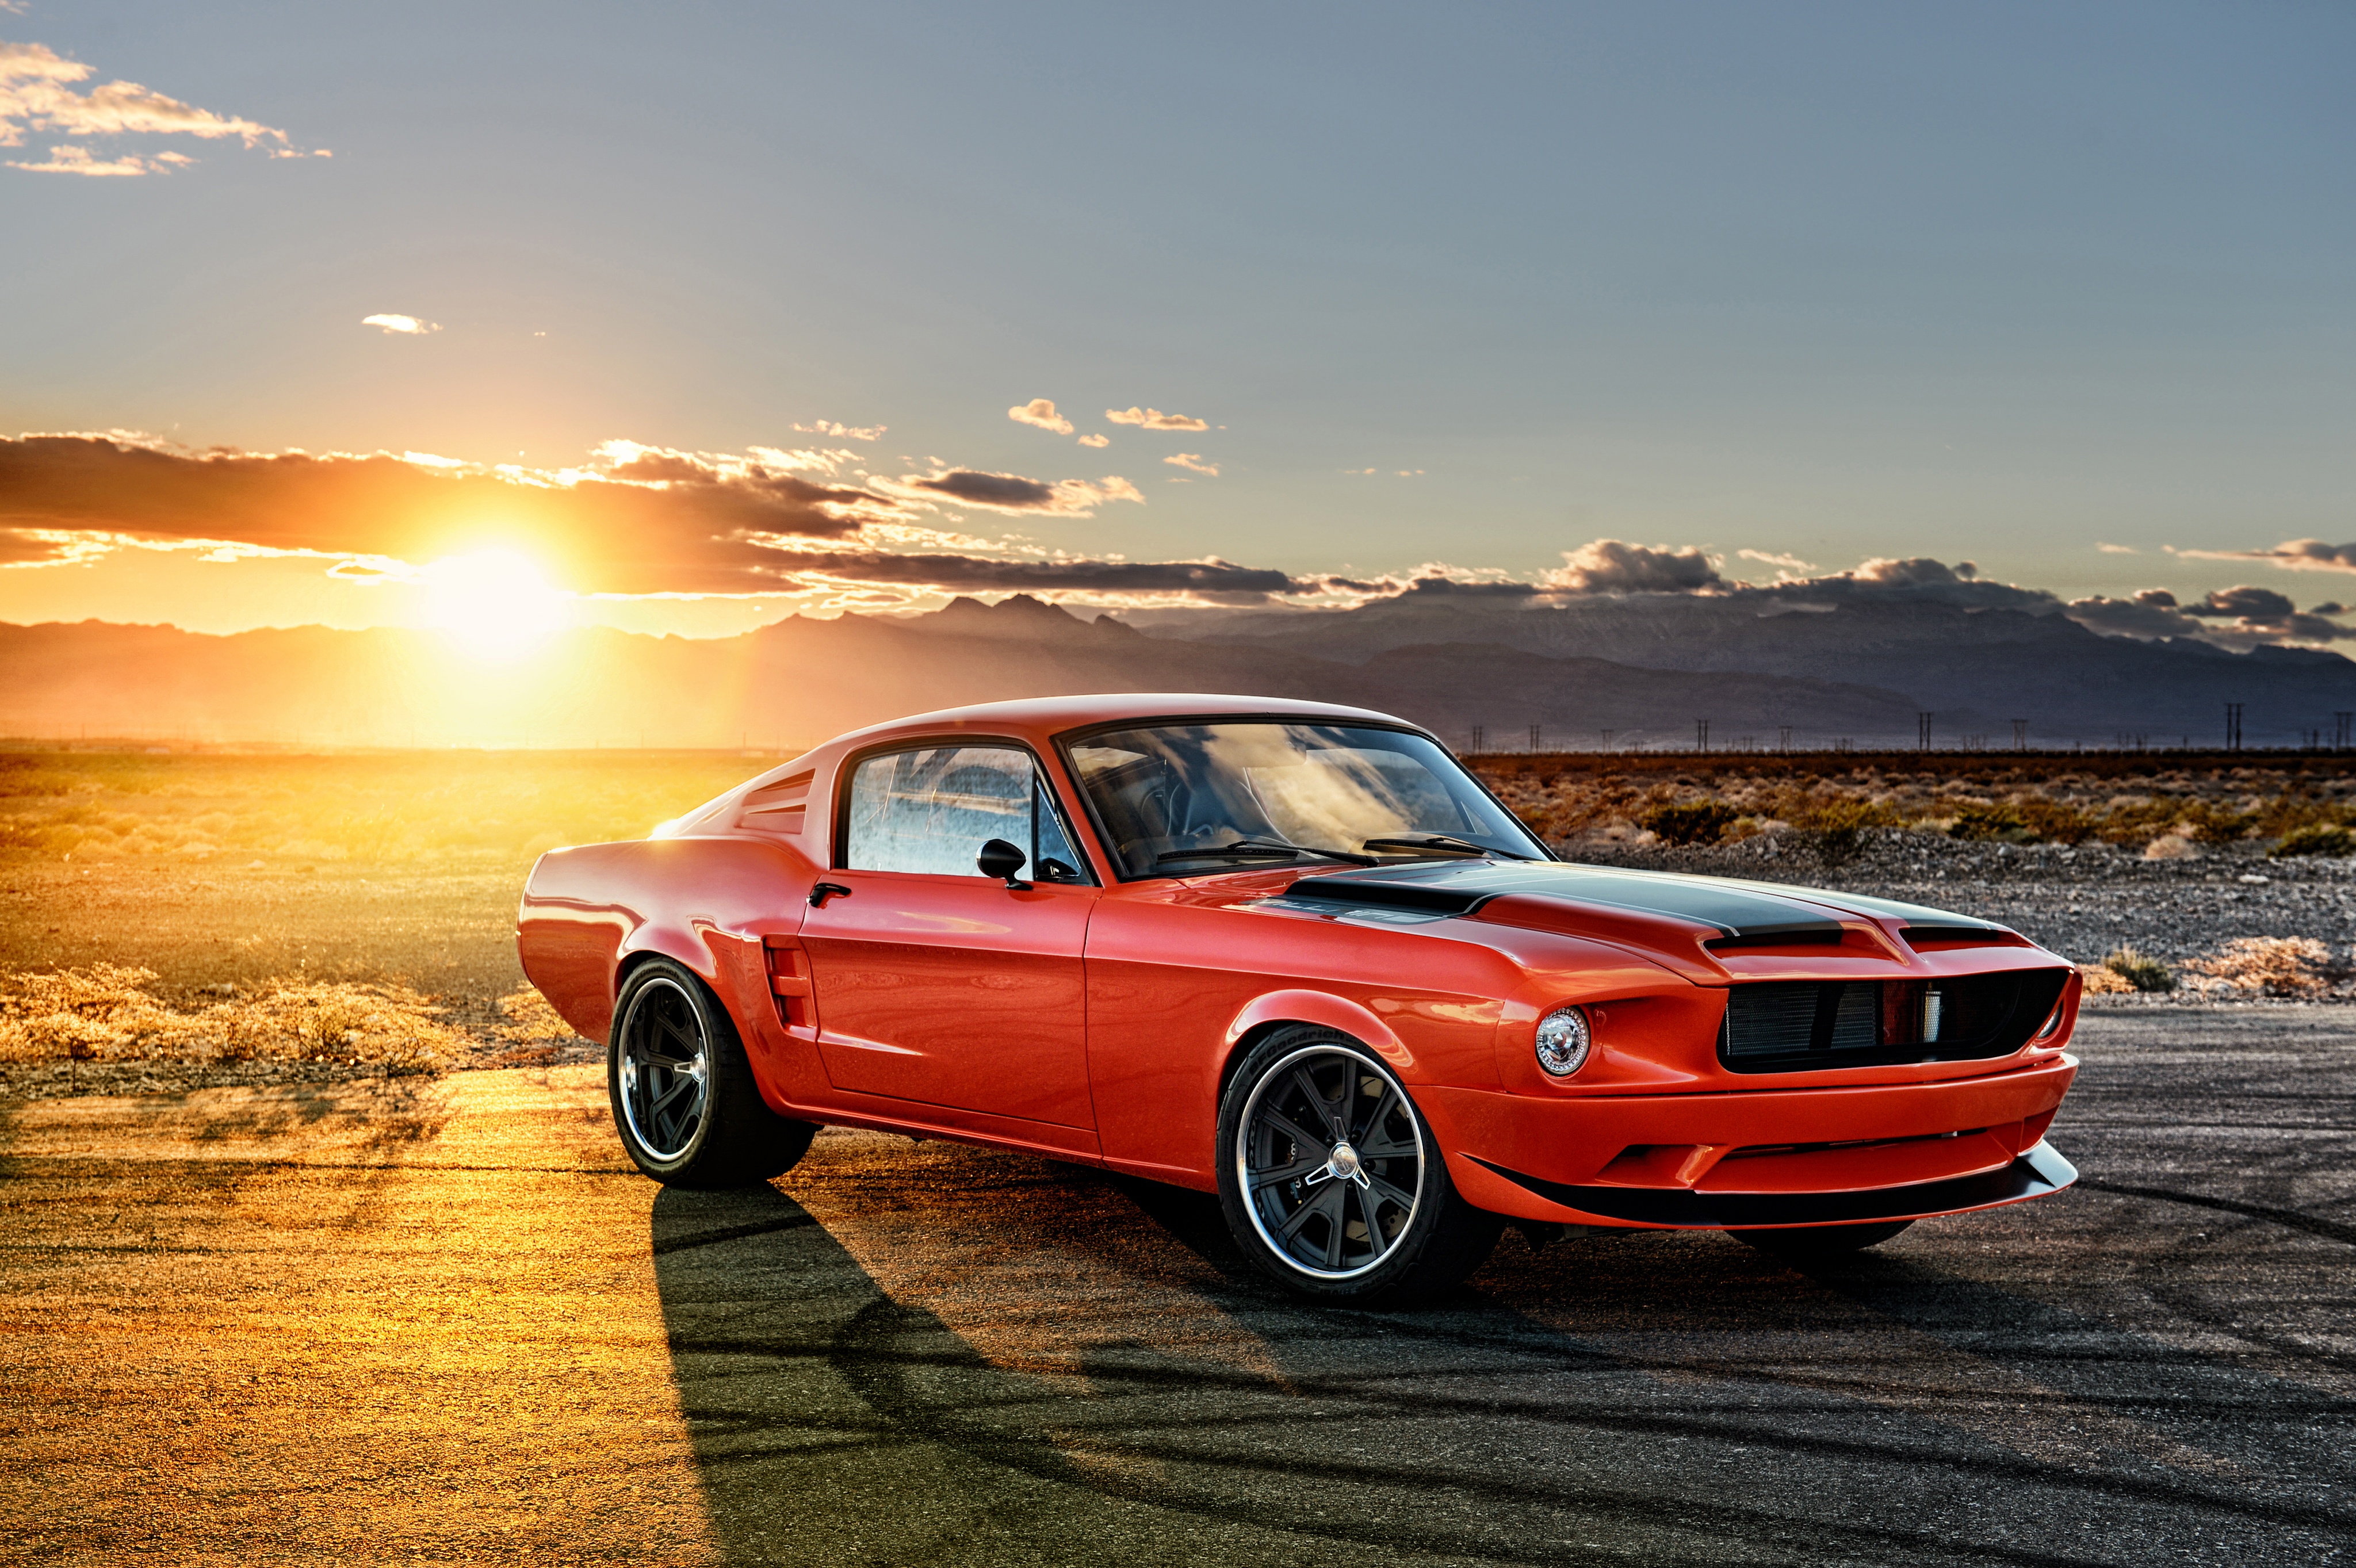 ford mustang, vehicles, ford mustang fastback, car, fastback, ford, muscle car, sunset